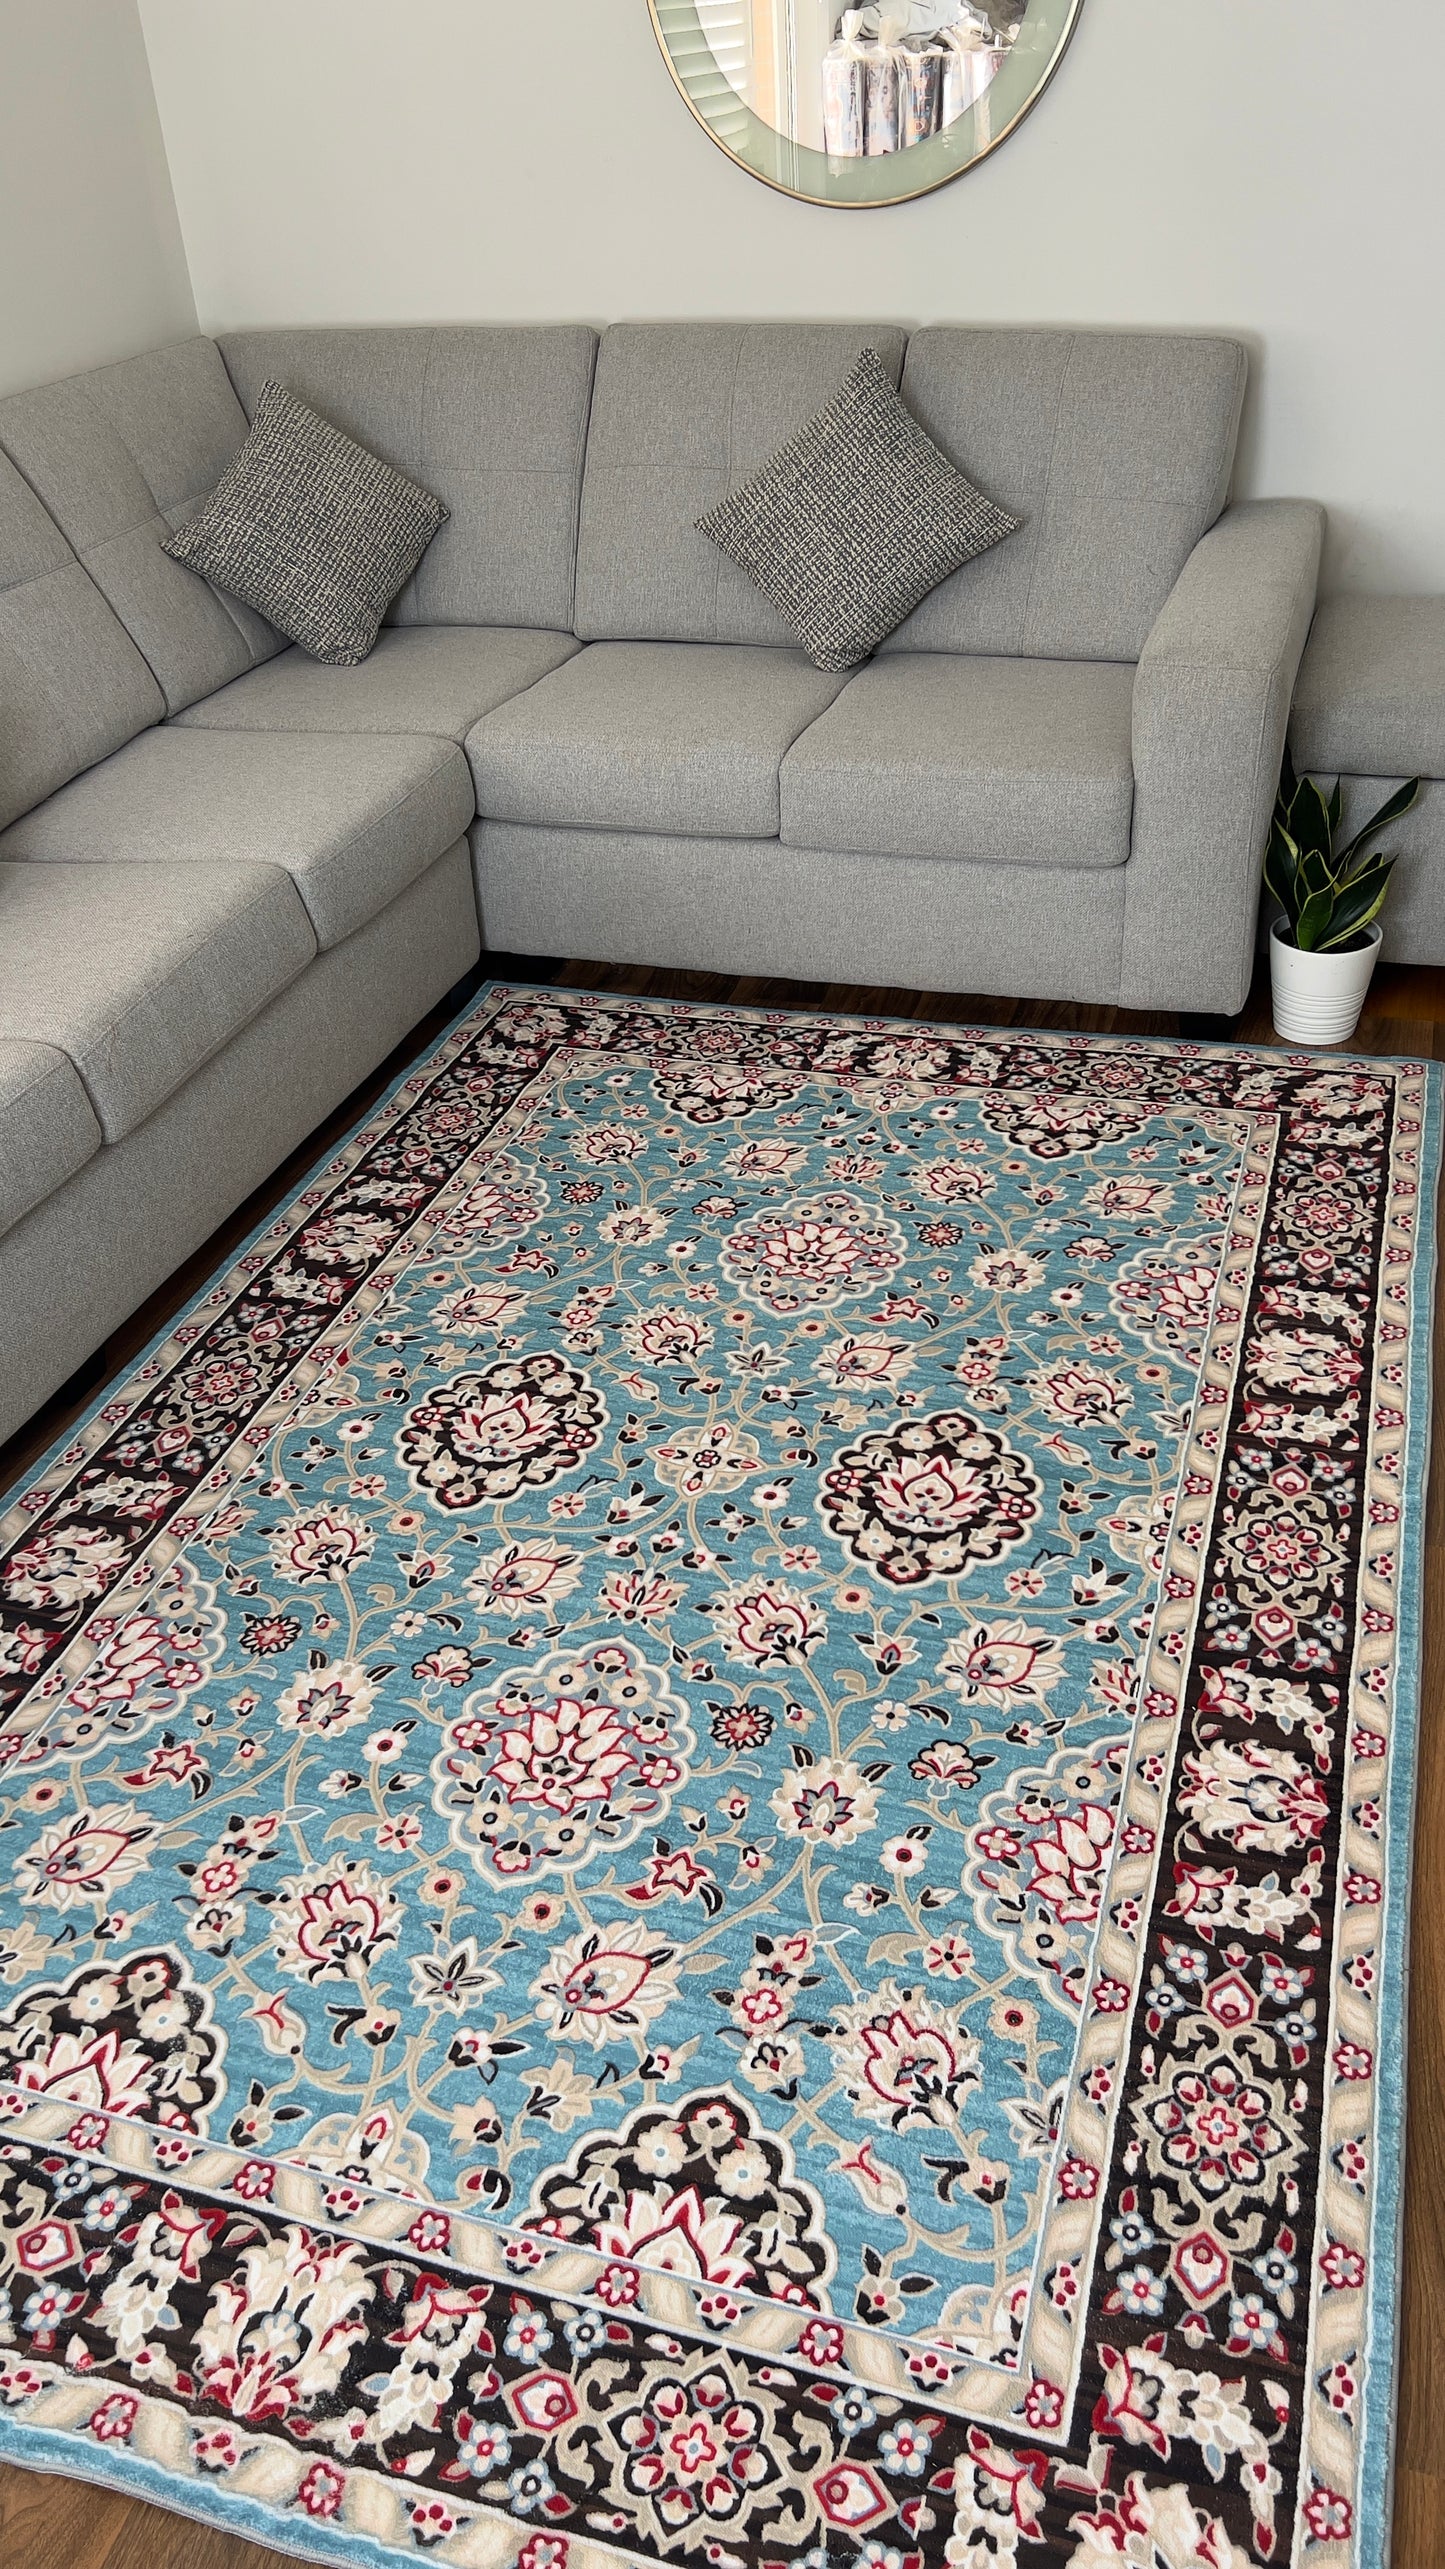 Luxury Redefined: Persian Rugs Crafted for You